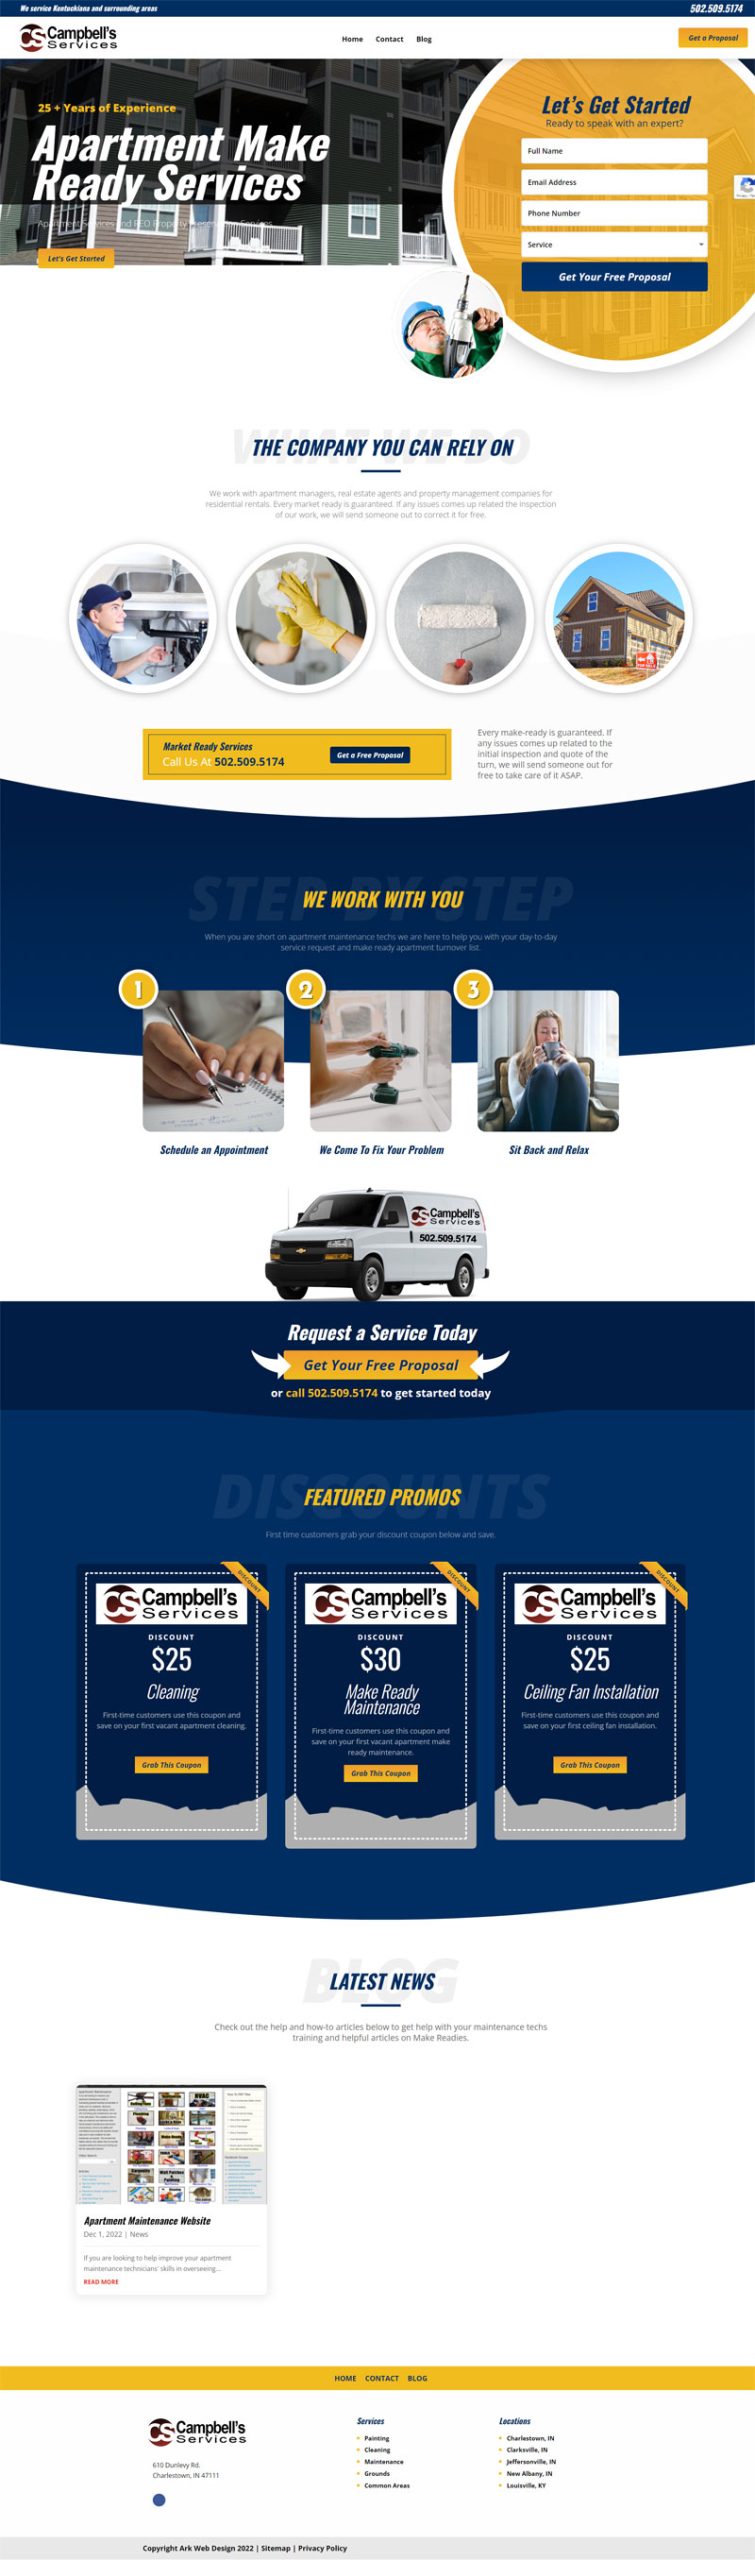 Campbell’s Services Website Layout